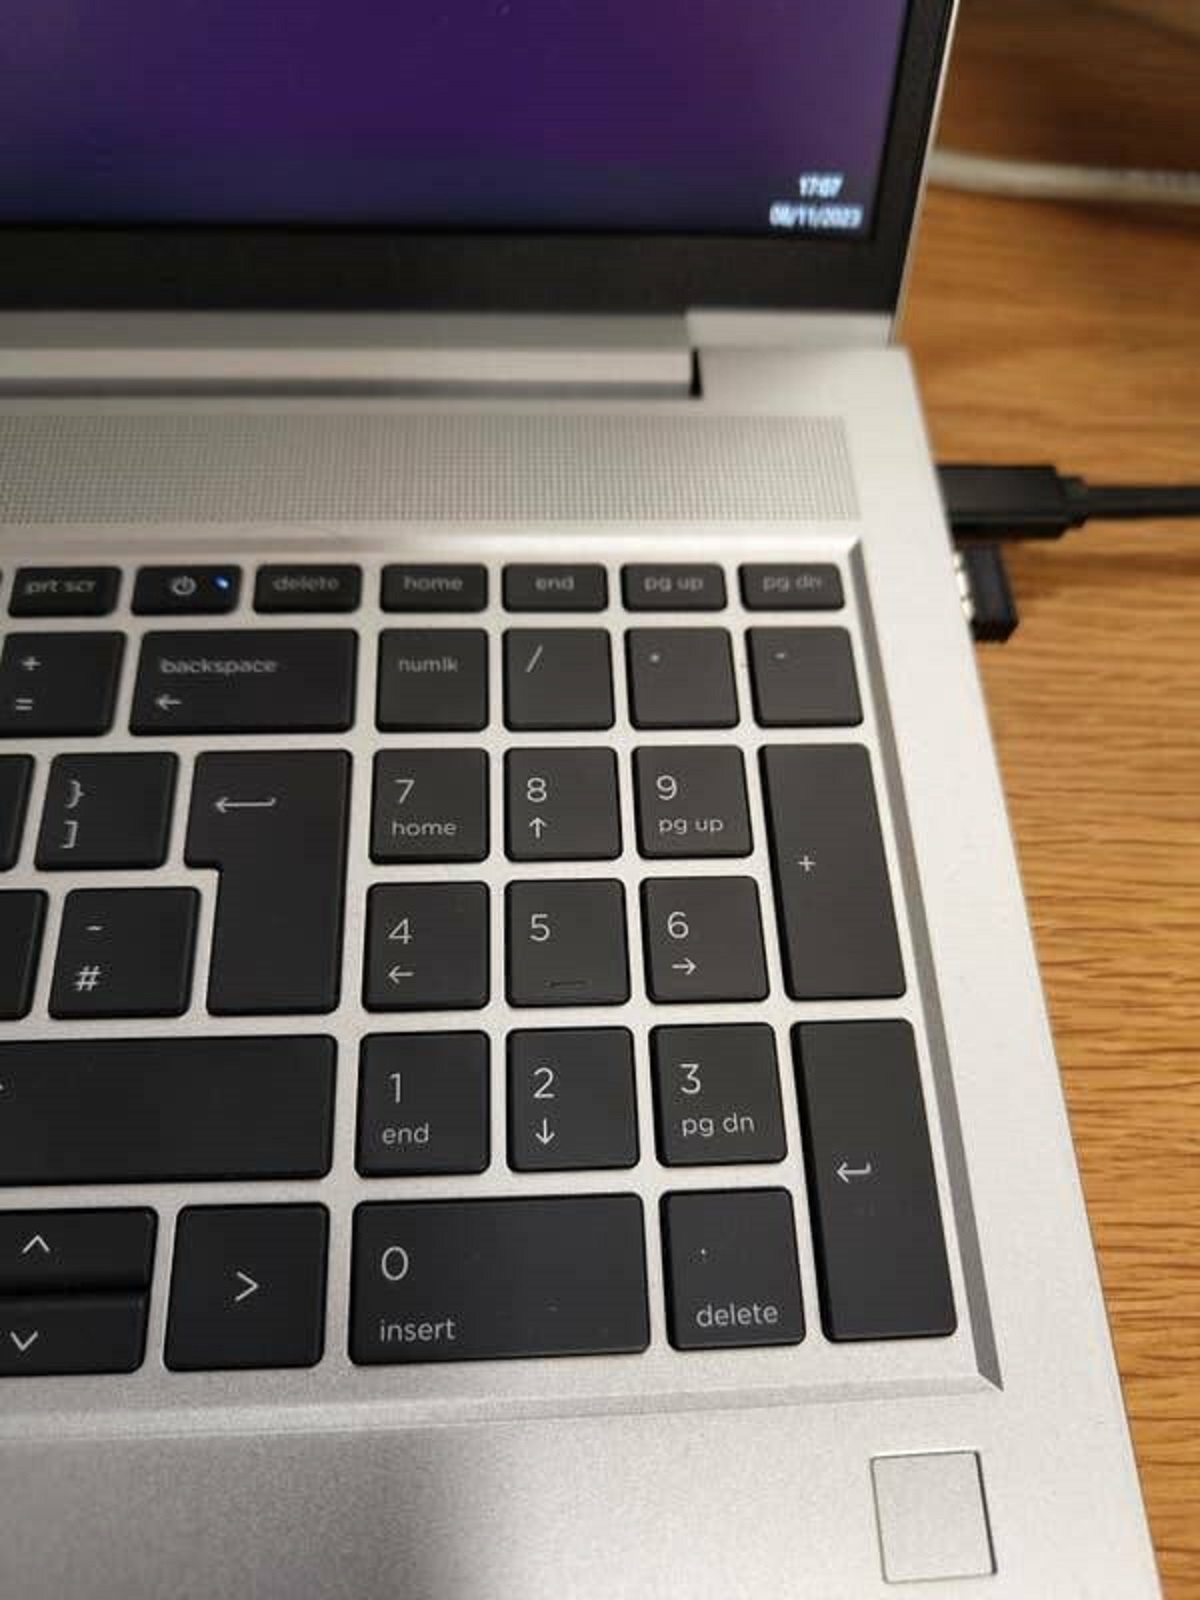 just for fun, check out the optical illusion these laptop keys make: